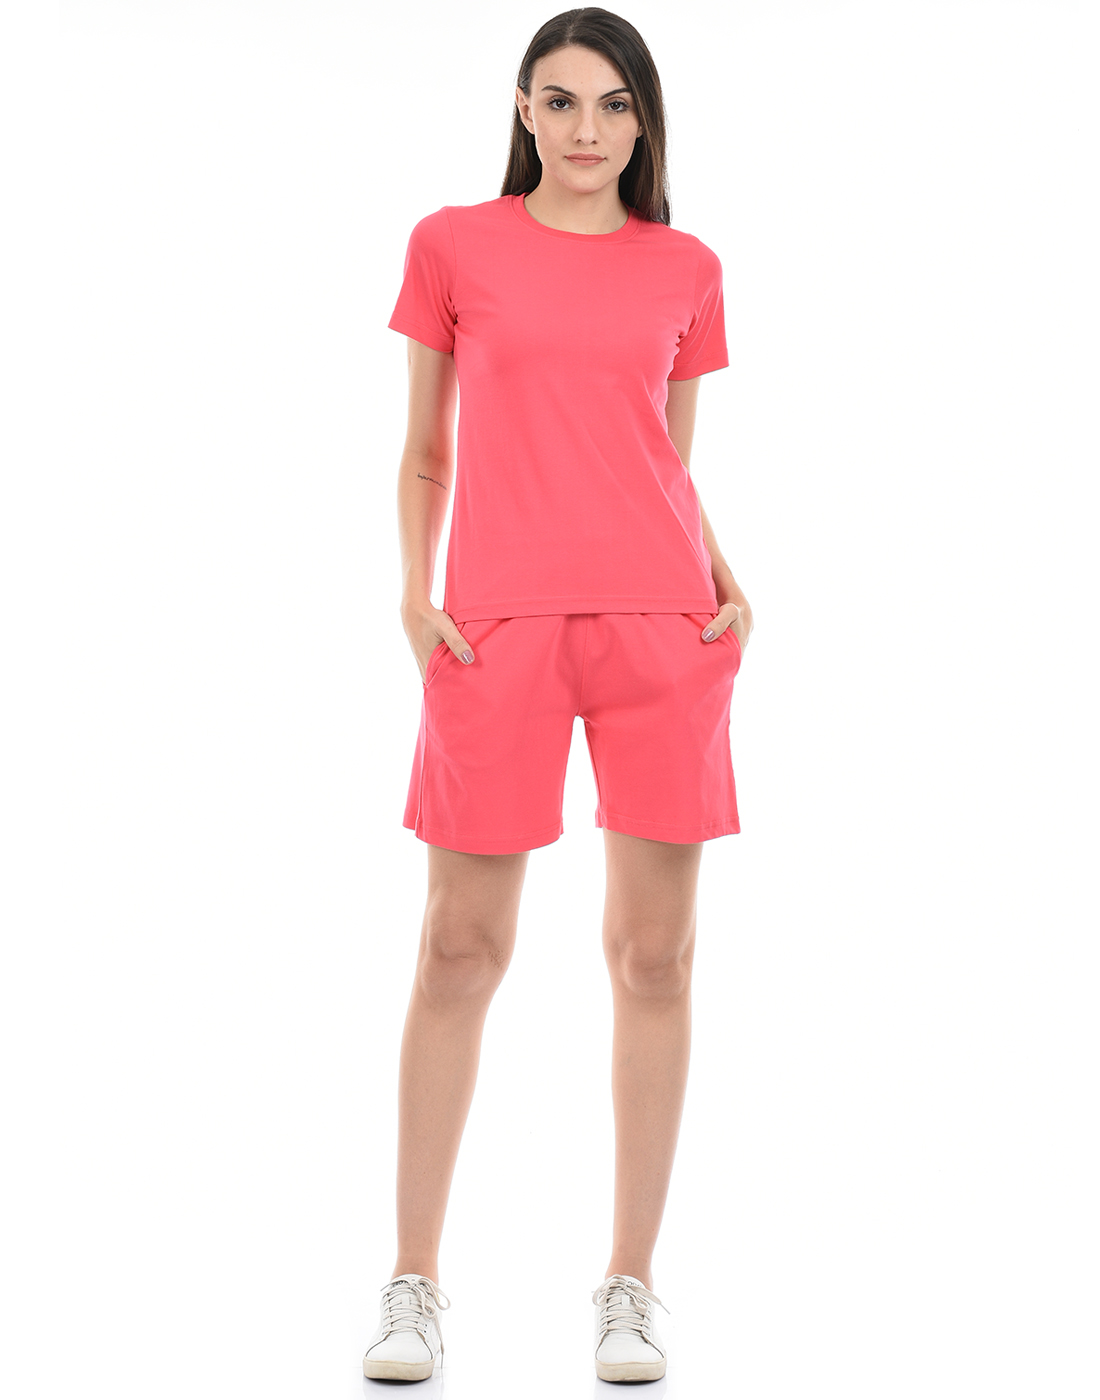 ONEWAY Round Neck Half Sleeves Solid Night Suit with shorts for Women|100% Cotton|Comfort Fit|Night Wear|Women's Comfortable PJ'S